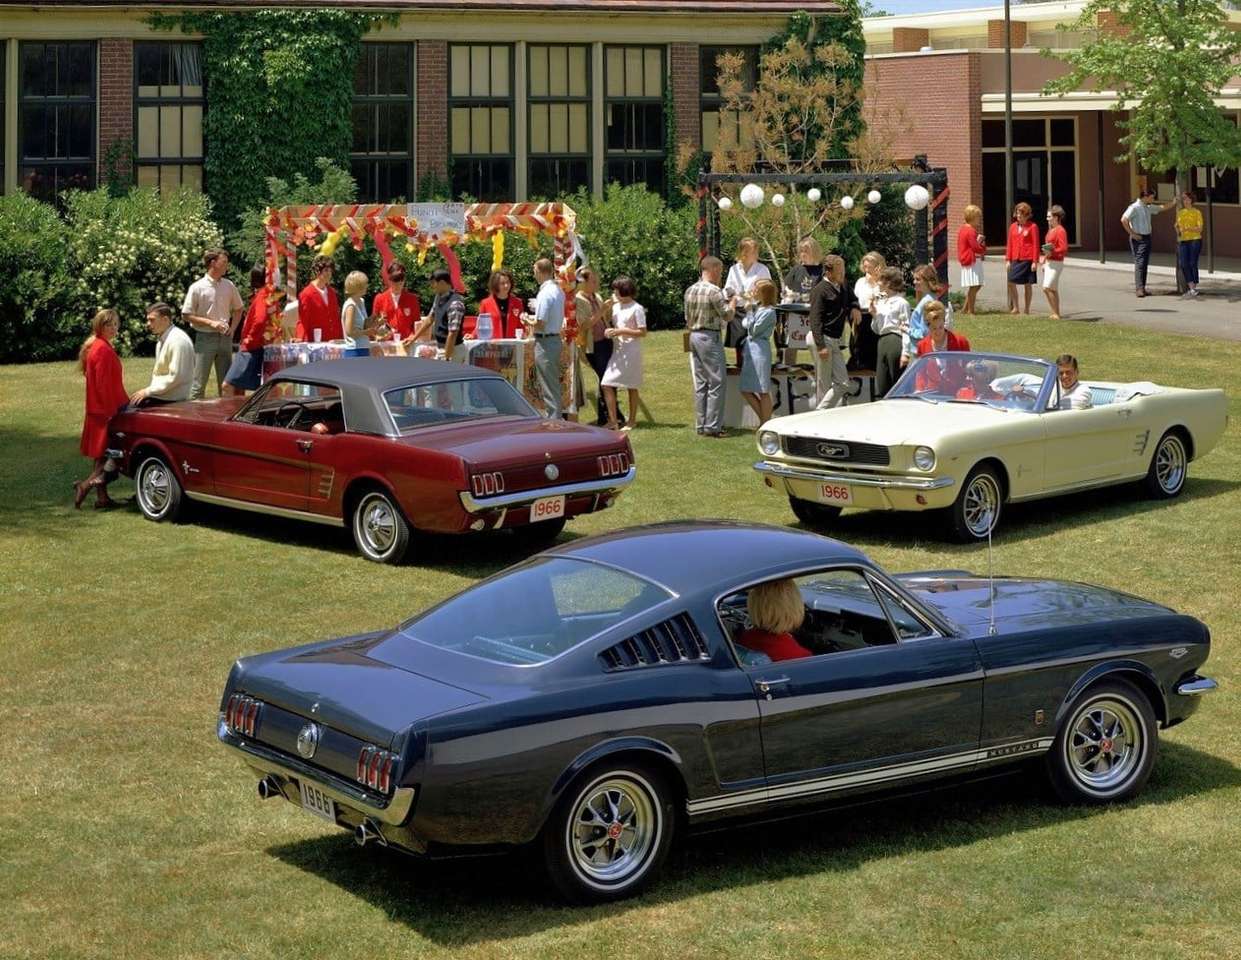 1966 Ford Mustang online puzzle